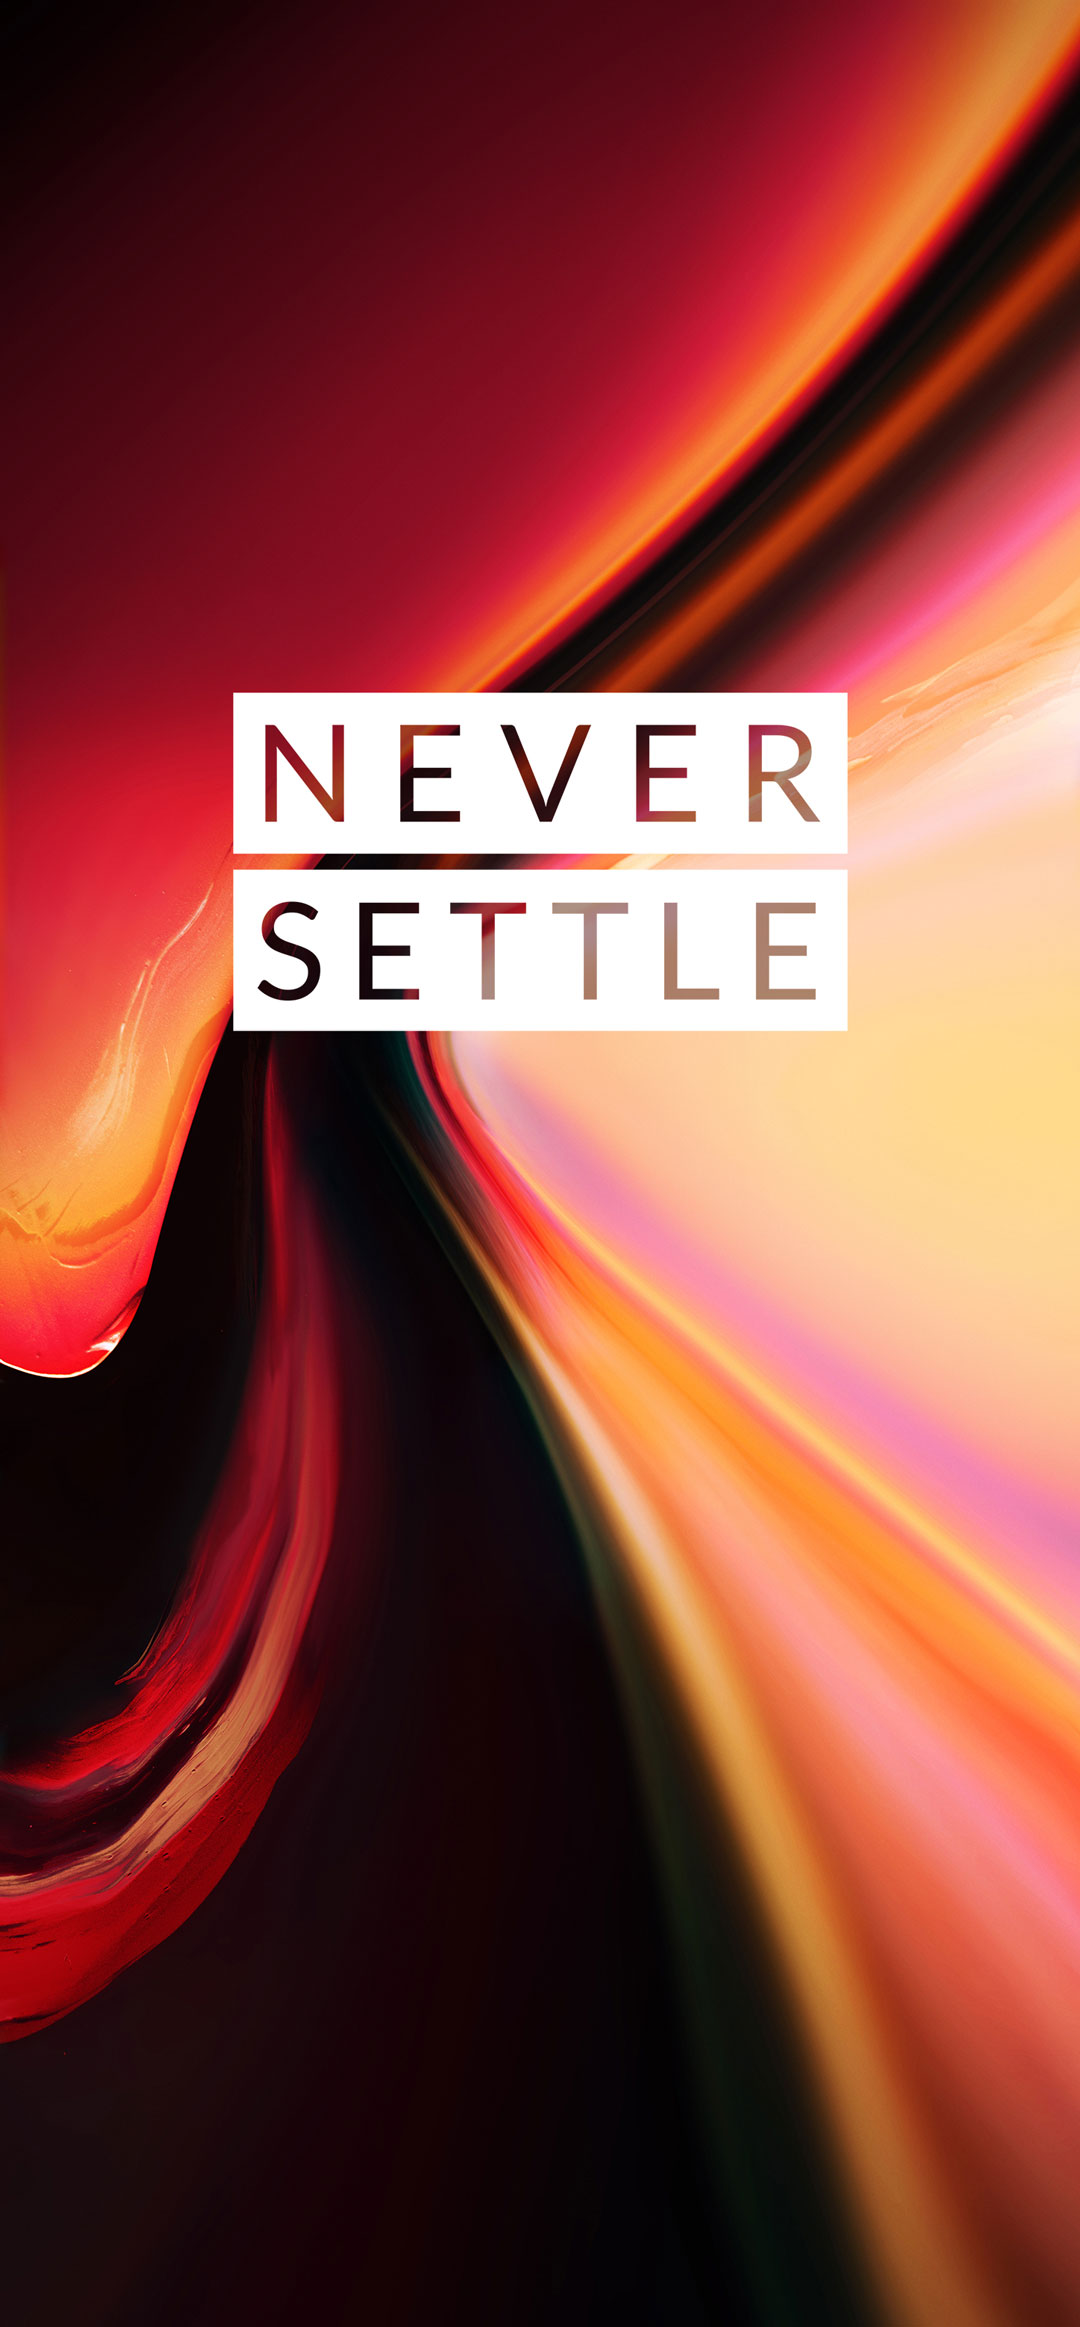 oneplus one wallpaper 1080p,red,text,graphic design,font,line